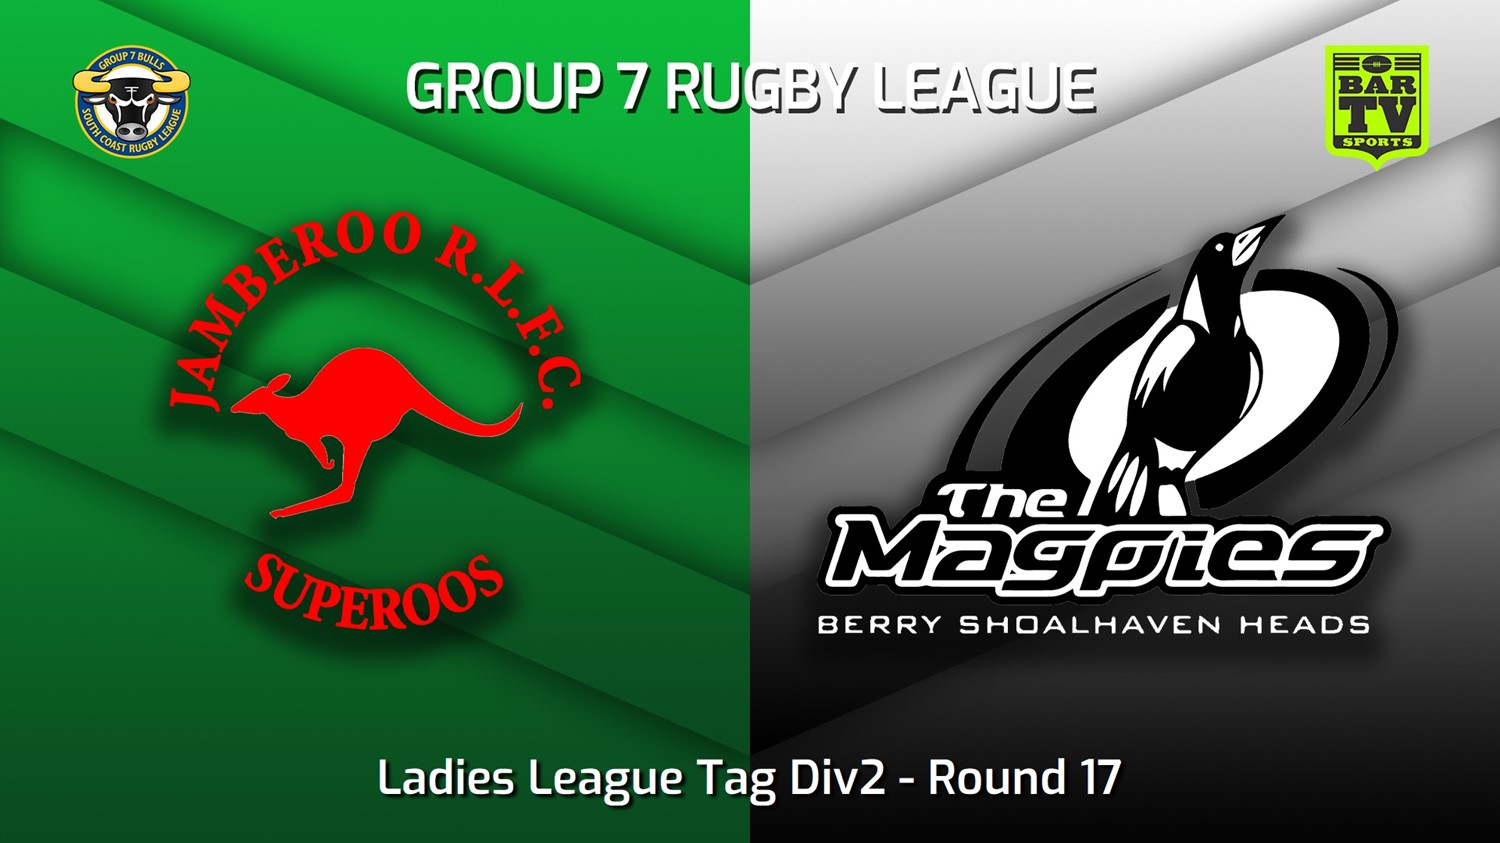 220820-South Coast Round 17 - Ladies League Tag Div2 - Jamberoo v Berry-Shoalhaven Heads Magpies Slate Image